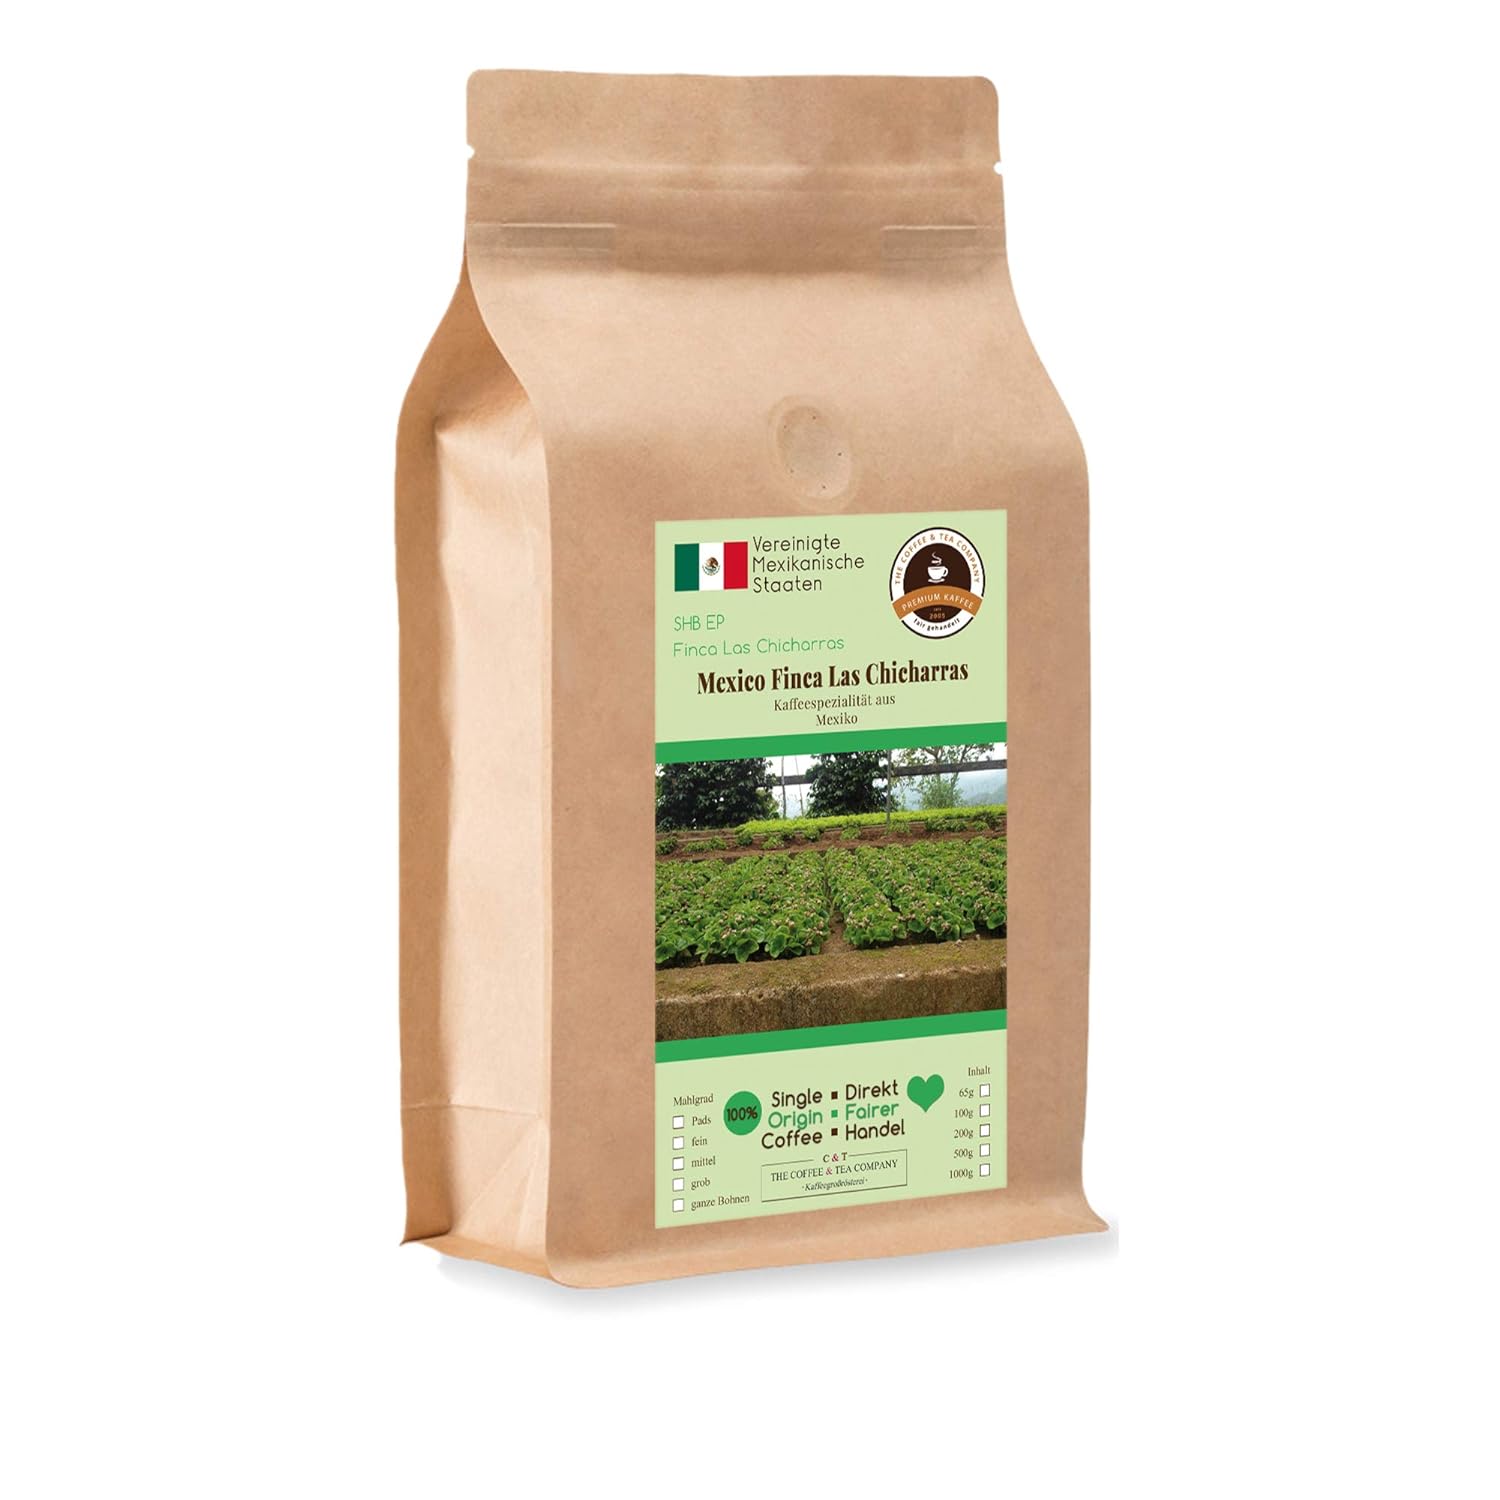 Coffee Globetrotter - Coffee with Heart - Mexico Finca Las Chicharras - 1000 g Medium Ground - for Coffee Filter Machine, Hand Filter - Top Coffee Fair Trade Supports Social Projects